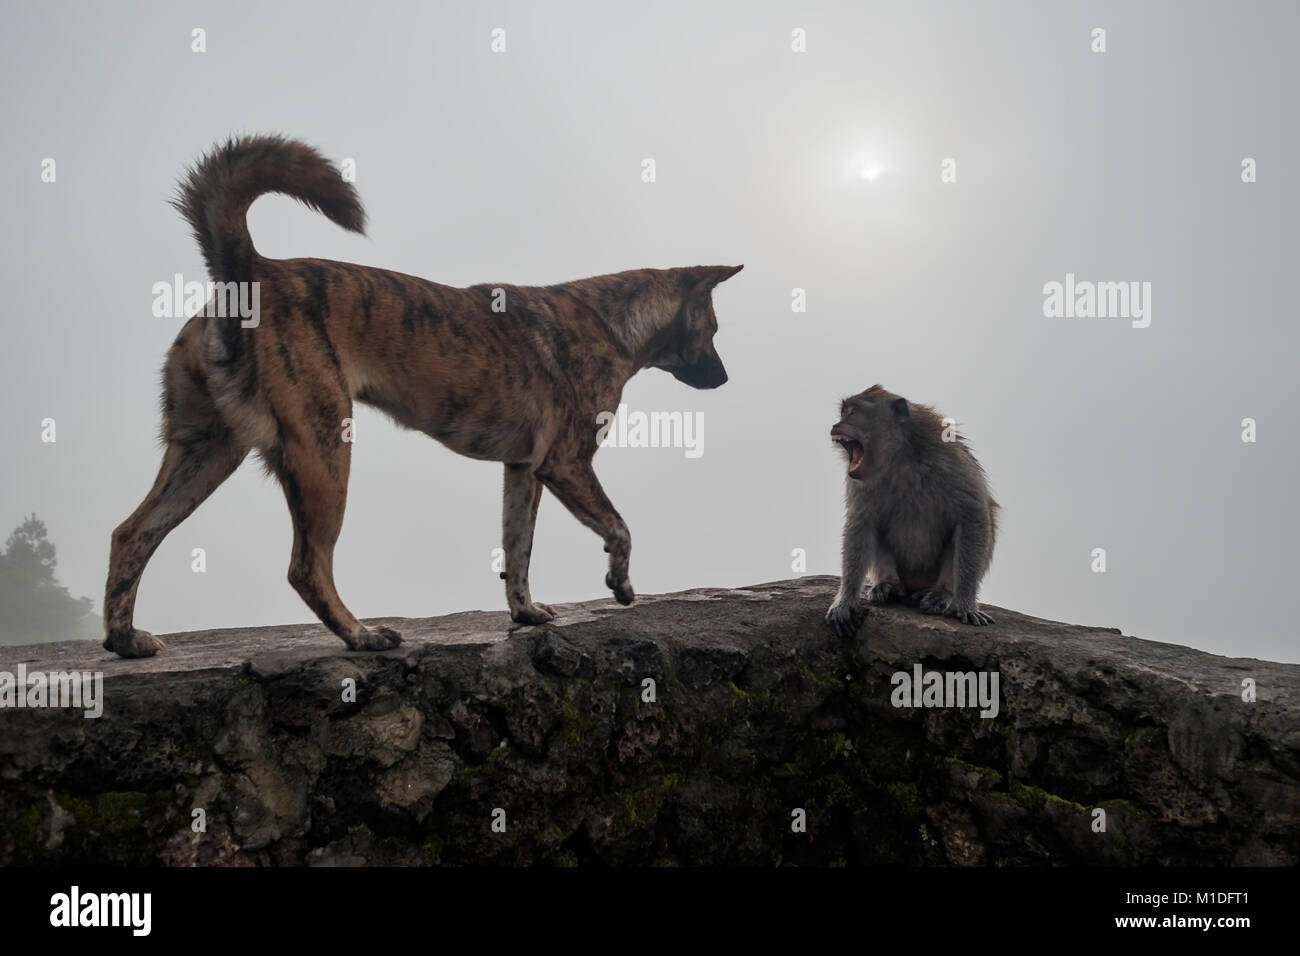 Monkey shouting on dog because she is frightened. Enemies in wild life Stock Photo